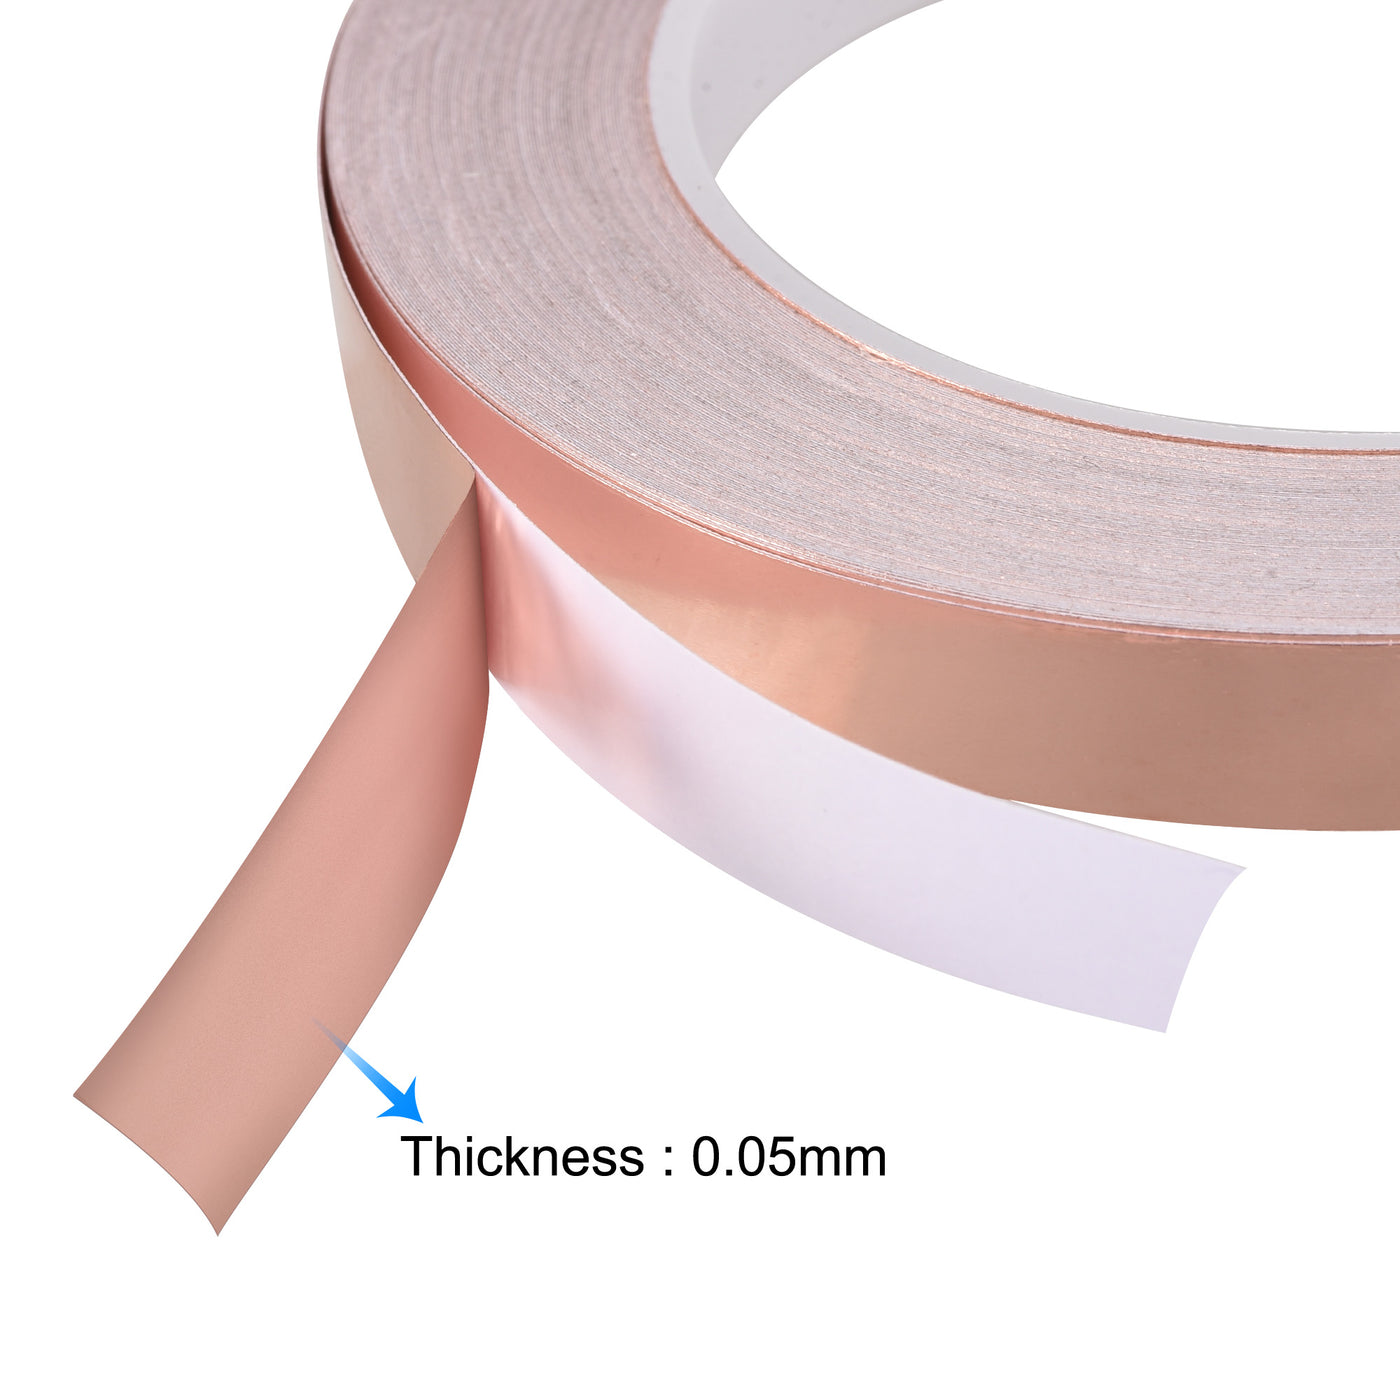 uxcell Uxcell Single-Sided Conductive Tape Copper Foil Tape 8mm x 30m/98.4ft 1pcs